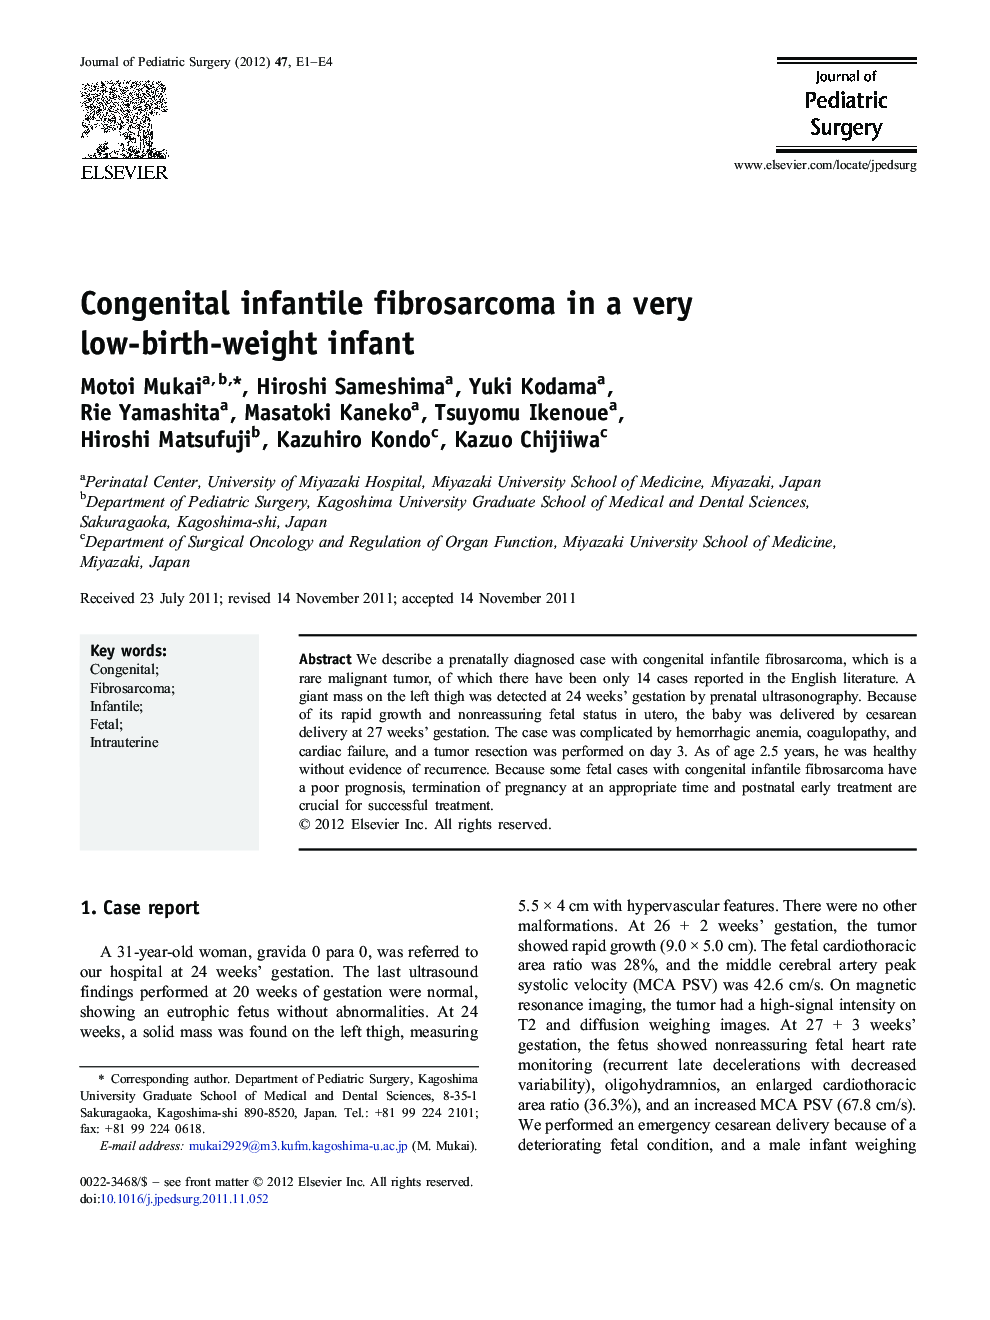 Congenital infantile fibrosarcoma in a very low-birth-weight infant